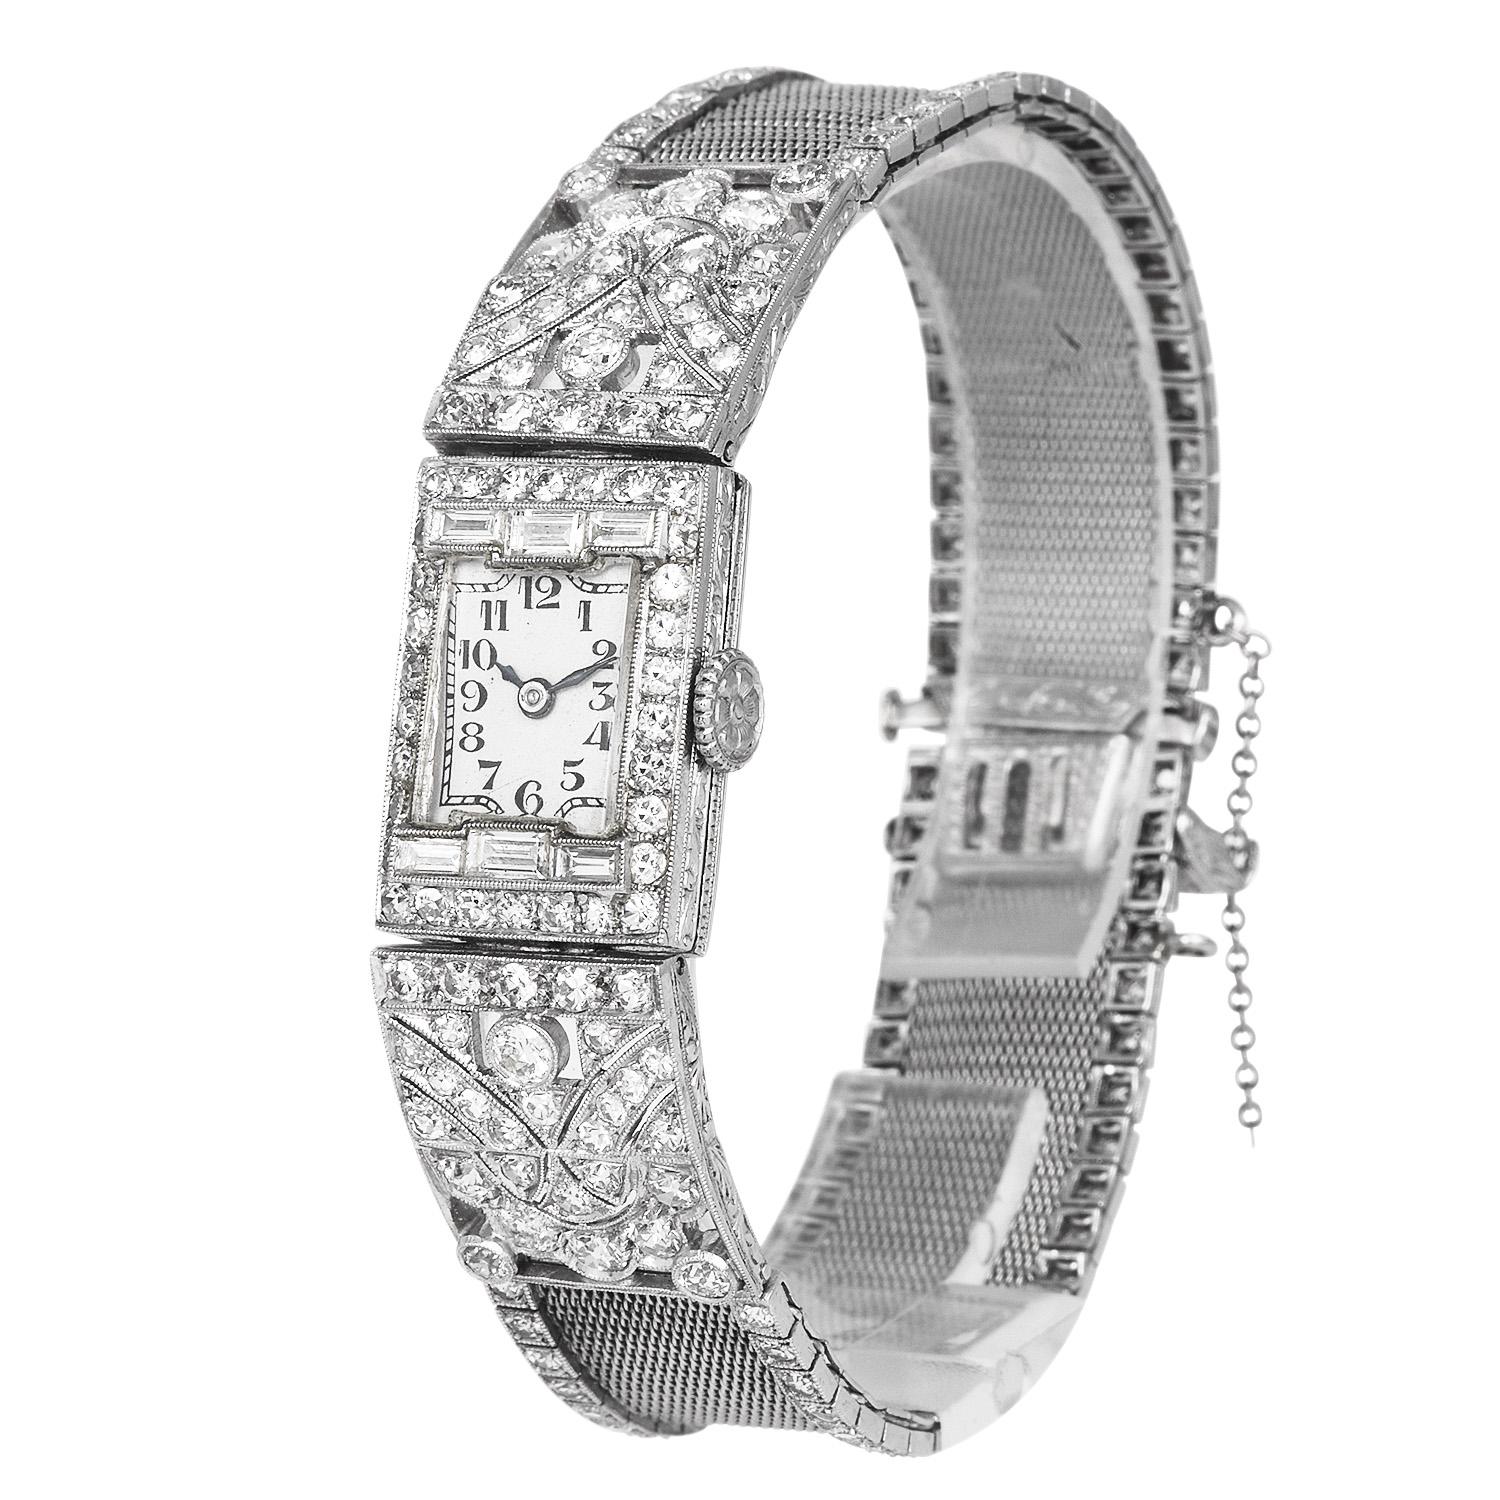 This Exquisite antique Diamond deco watch was inspired by a Geometrical & mesh design, and crafted in luxurious Platinum.

This Statement Piece will complement any evening attire.

Sparkling all over the piece are 186 Old Round Cut & (6)